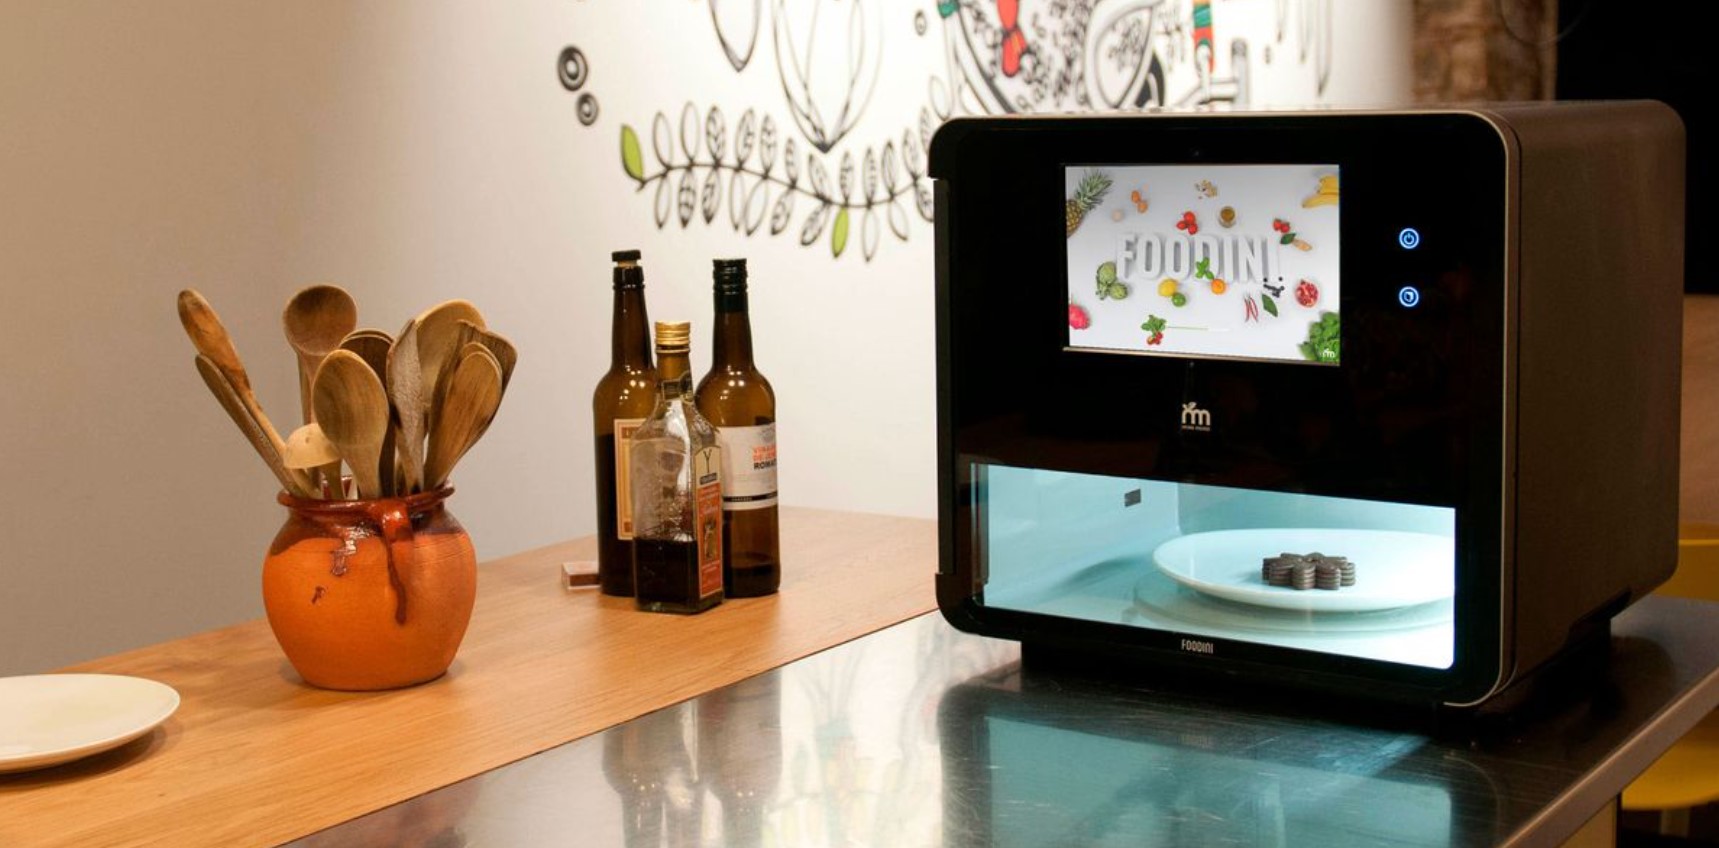 Foodini, This Is The Spanish 3D Printer That Prints Food